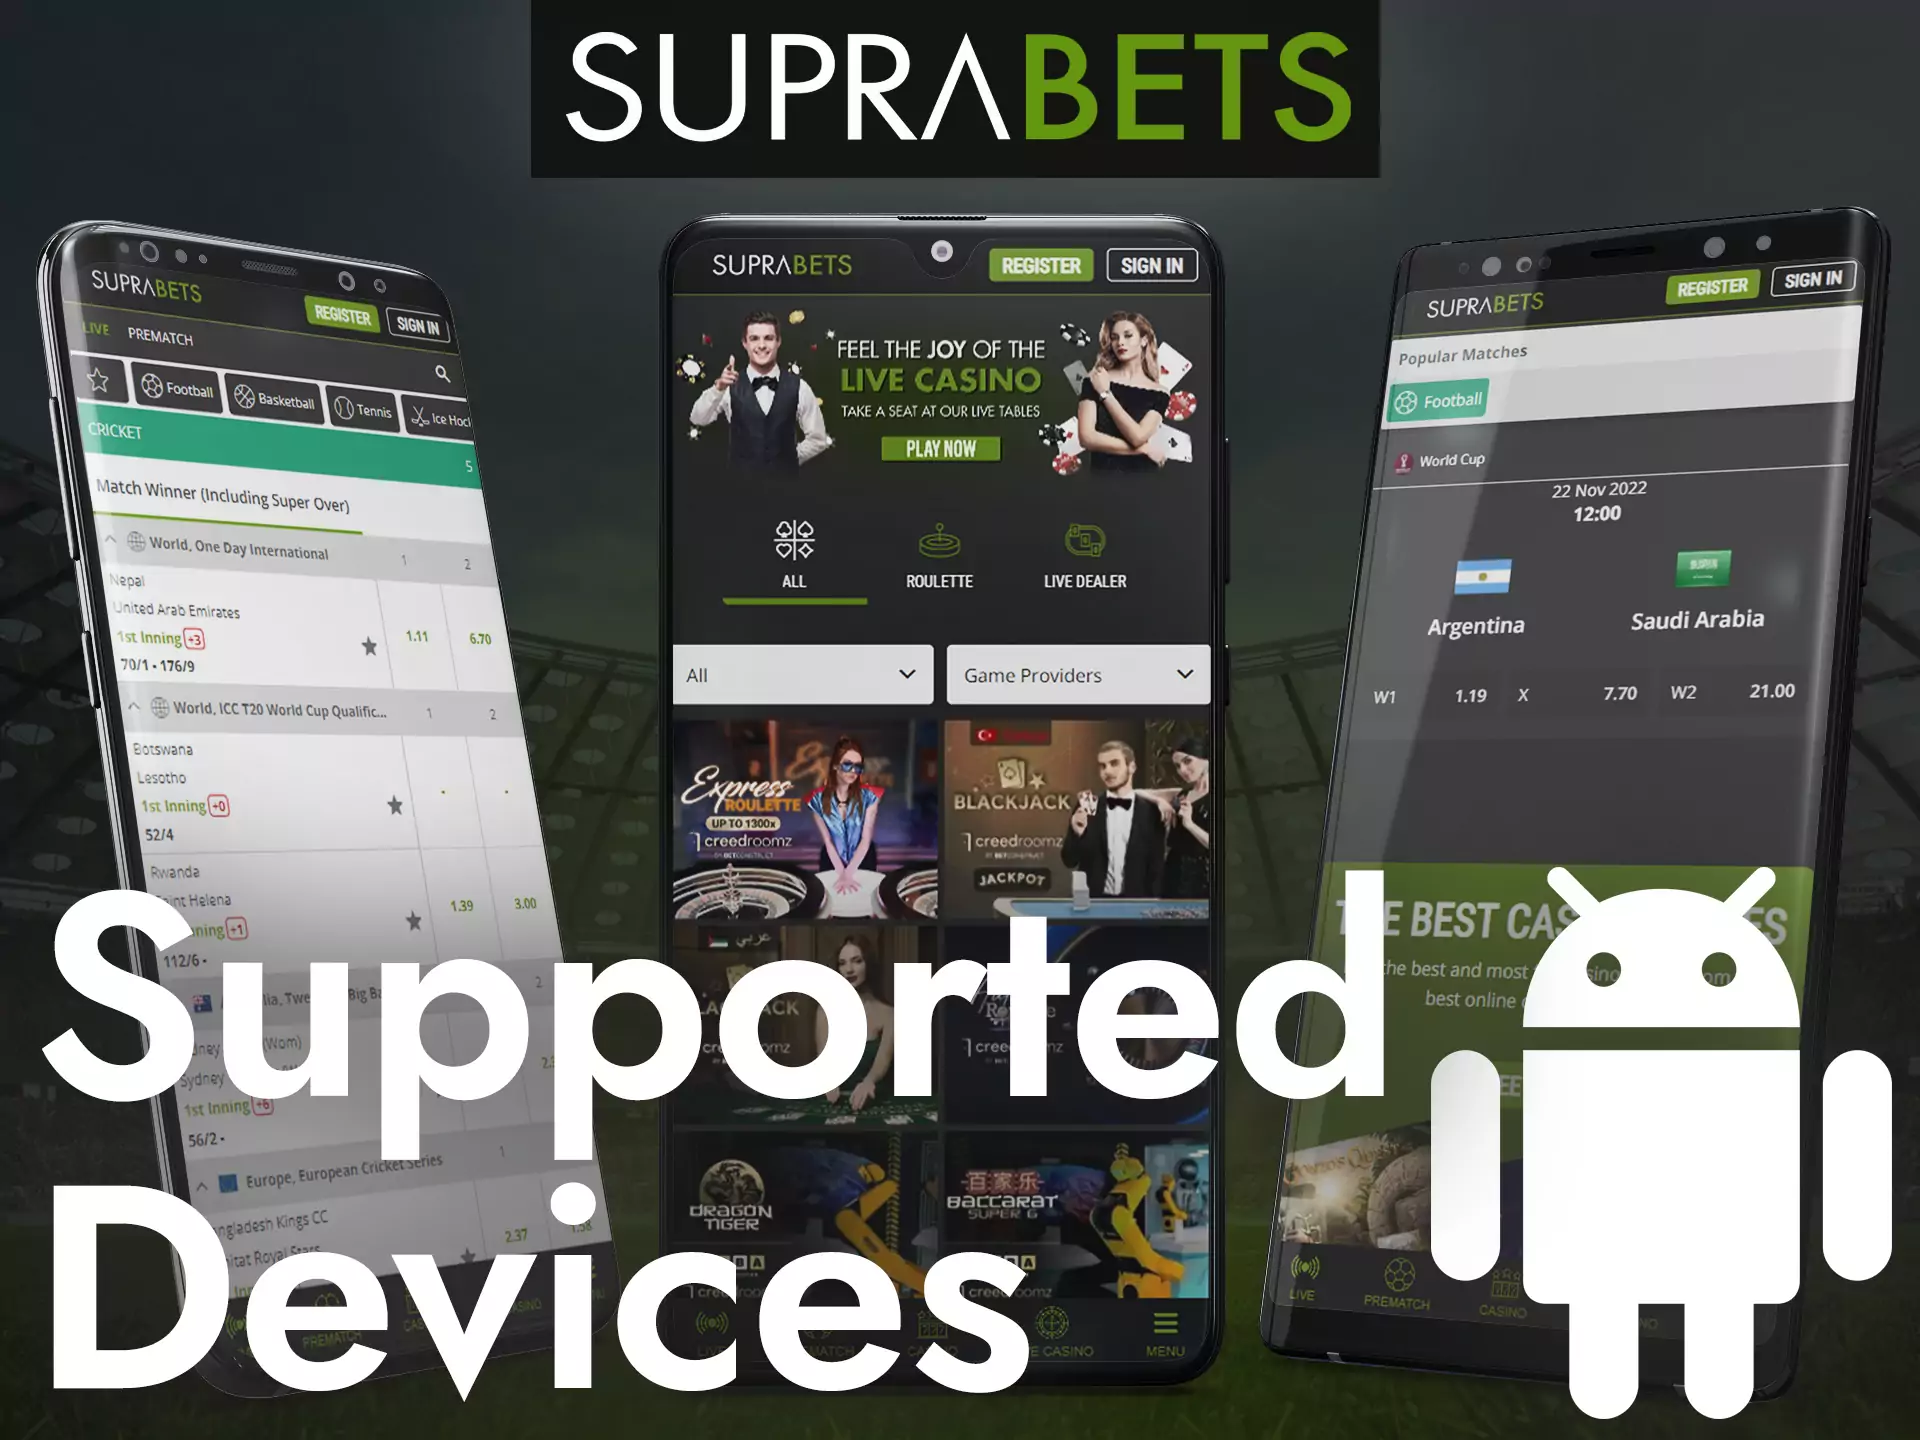 You can use Suprabets on different Android devices, many are supported.